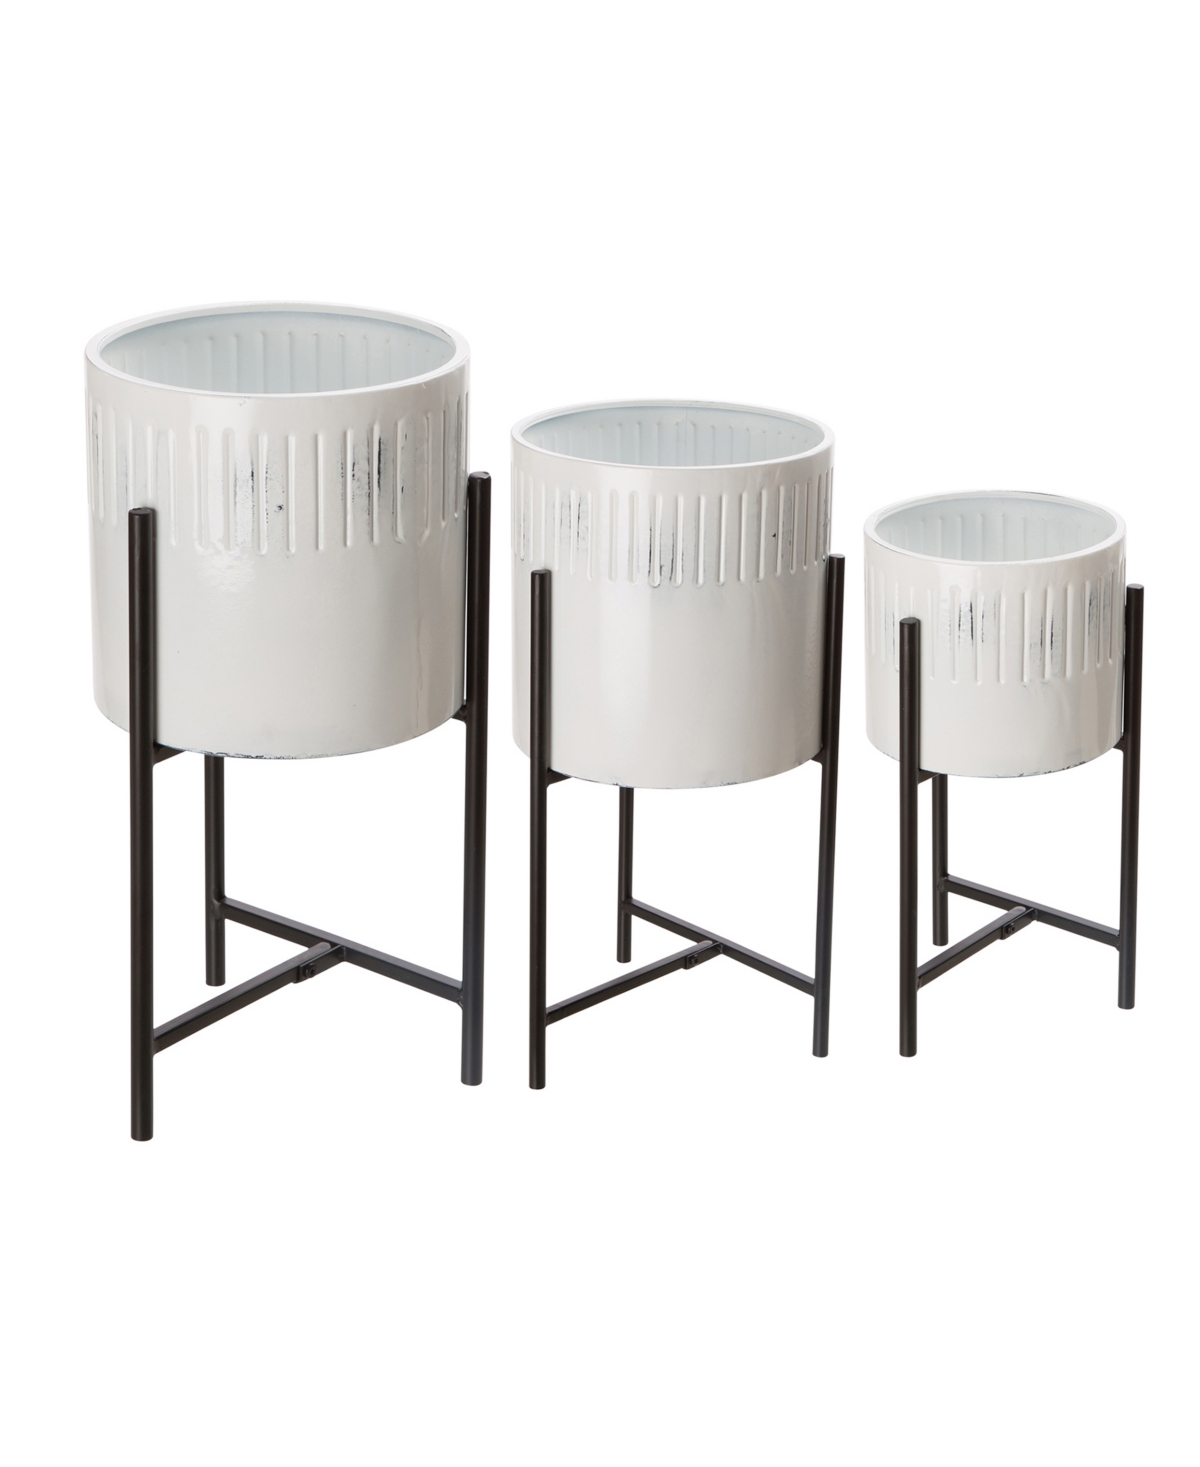 Washed White Metal Plant Stands Set of 3 - White